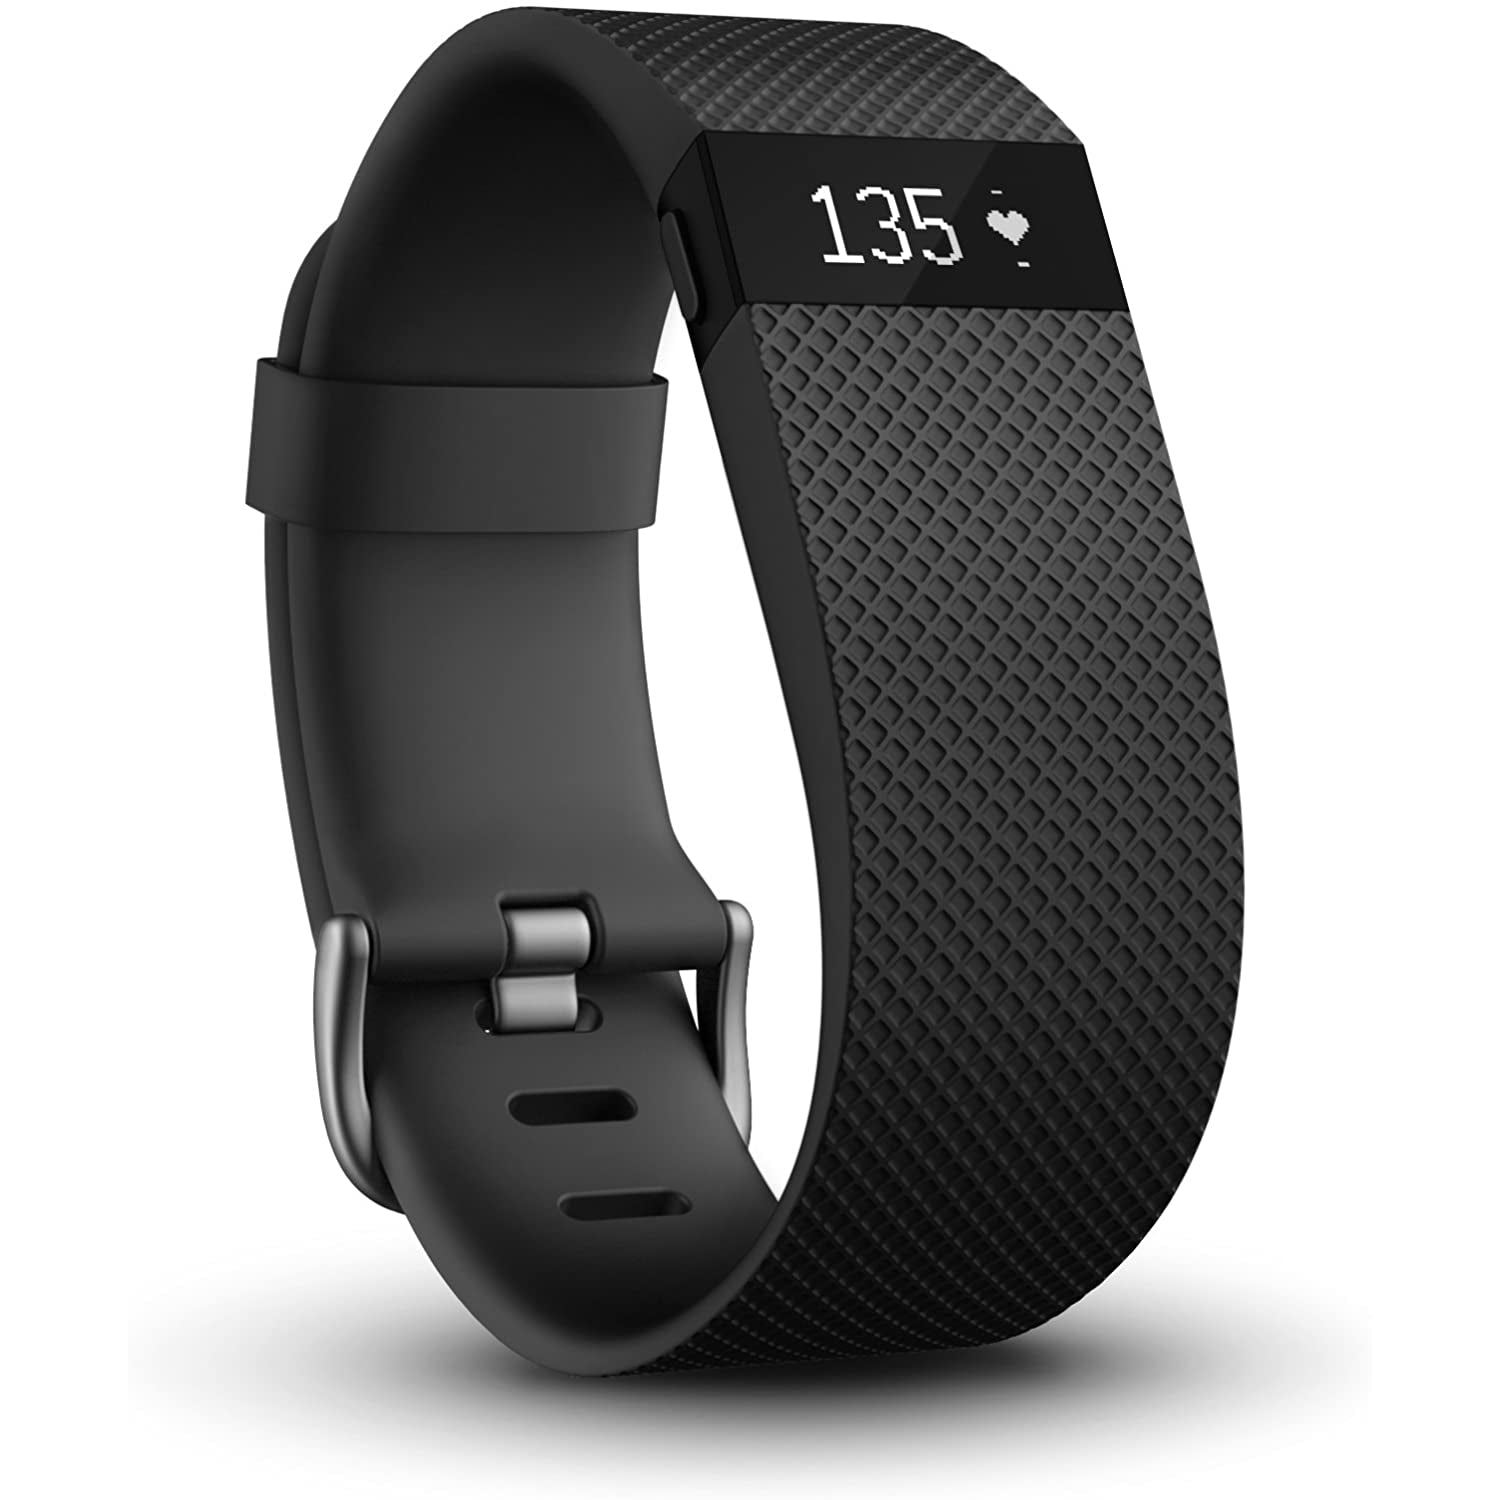 Fitbit Charge HR Heart Rate and Activity Wristband - Black - Refurbished Good